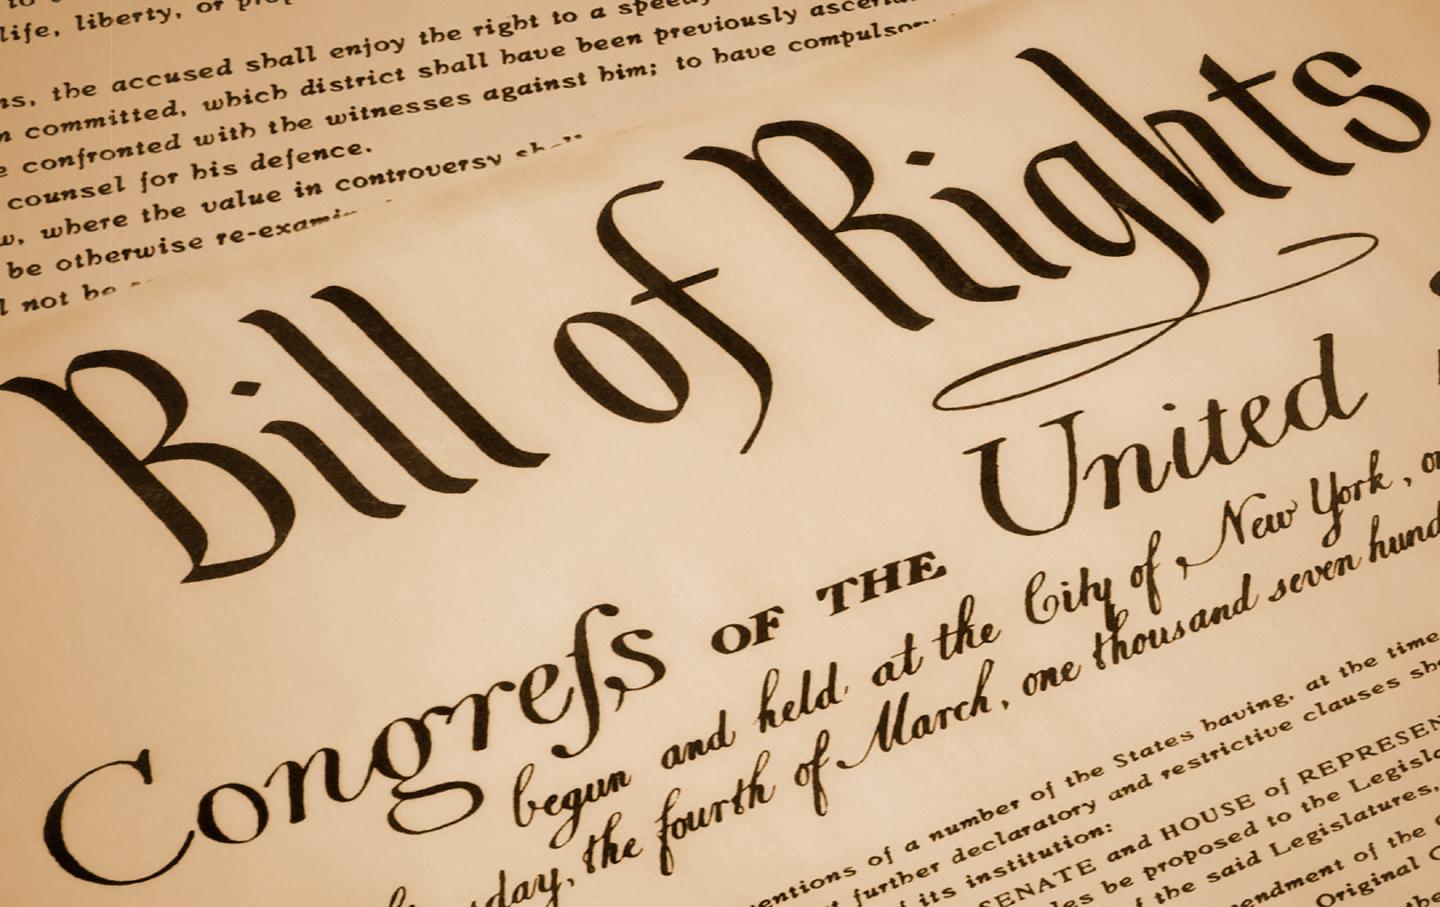 A replica of the United States Bill of Rights.